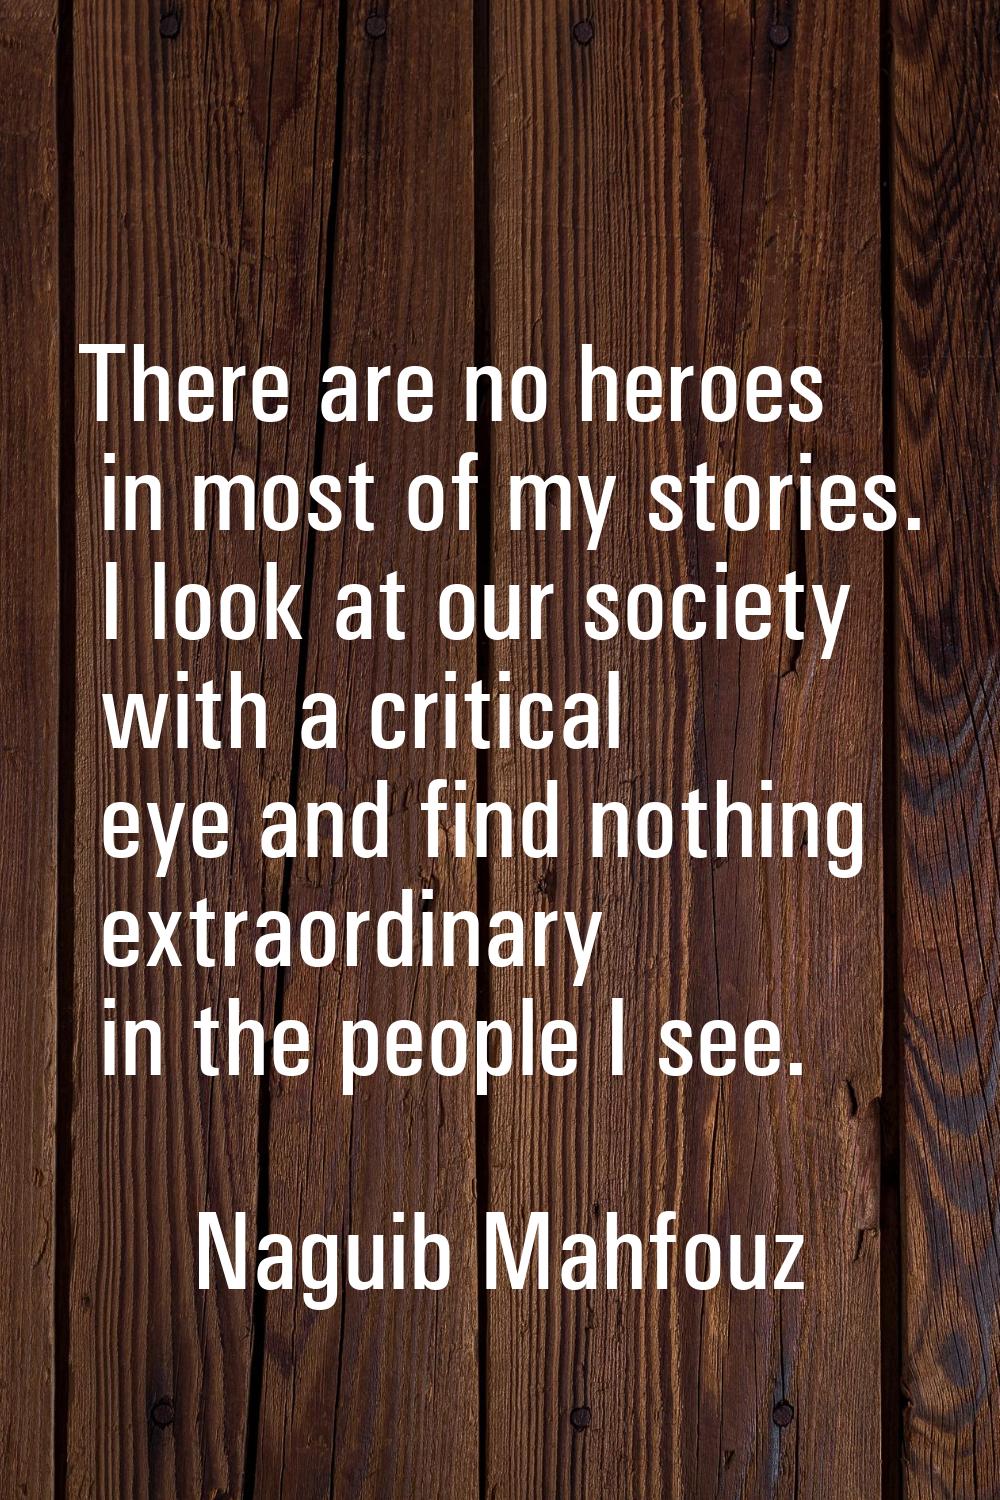 There are no heroes in most of my stories. I look at our society with a critical eye and find nothi